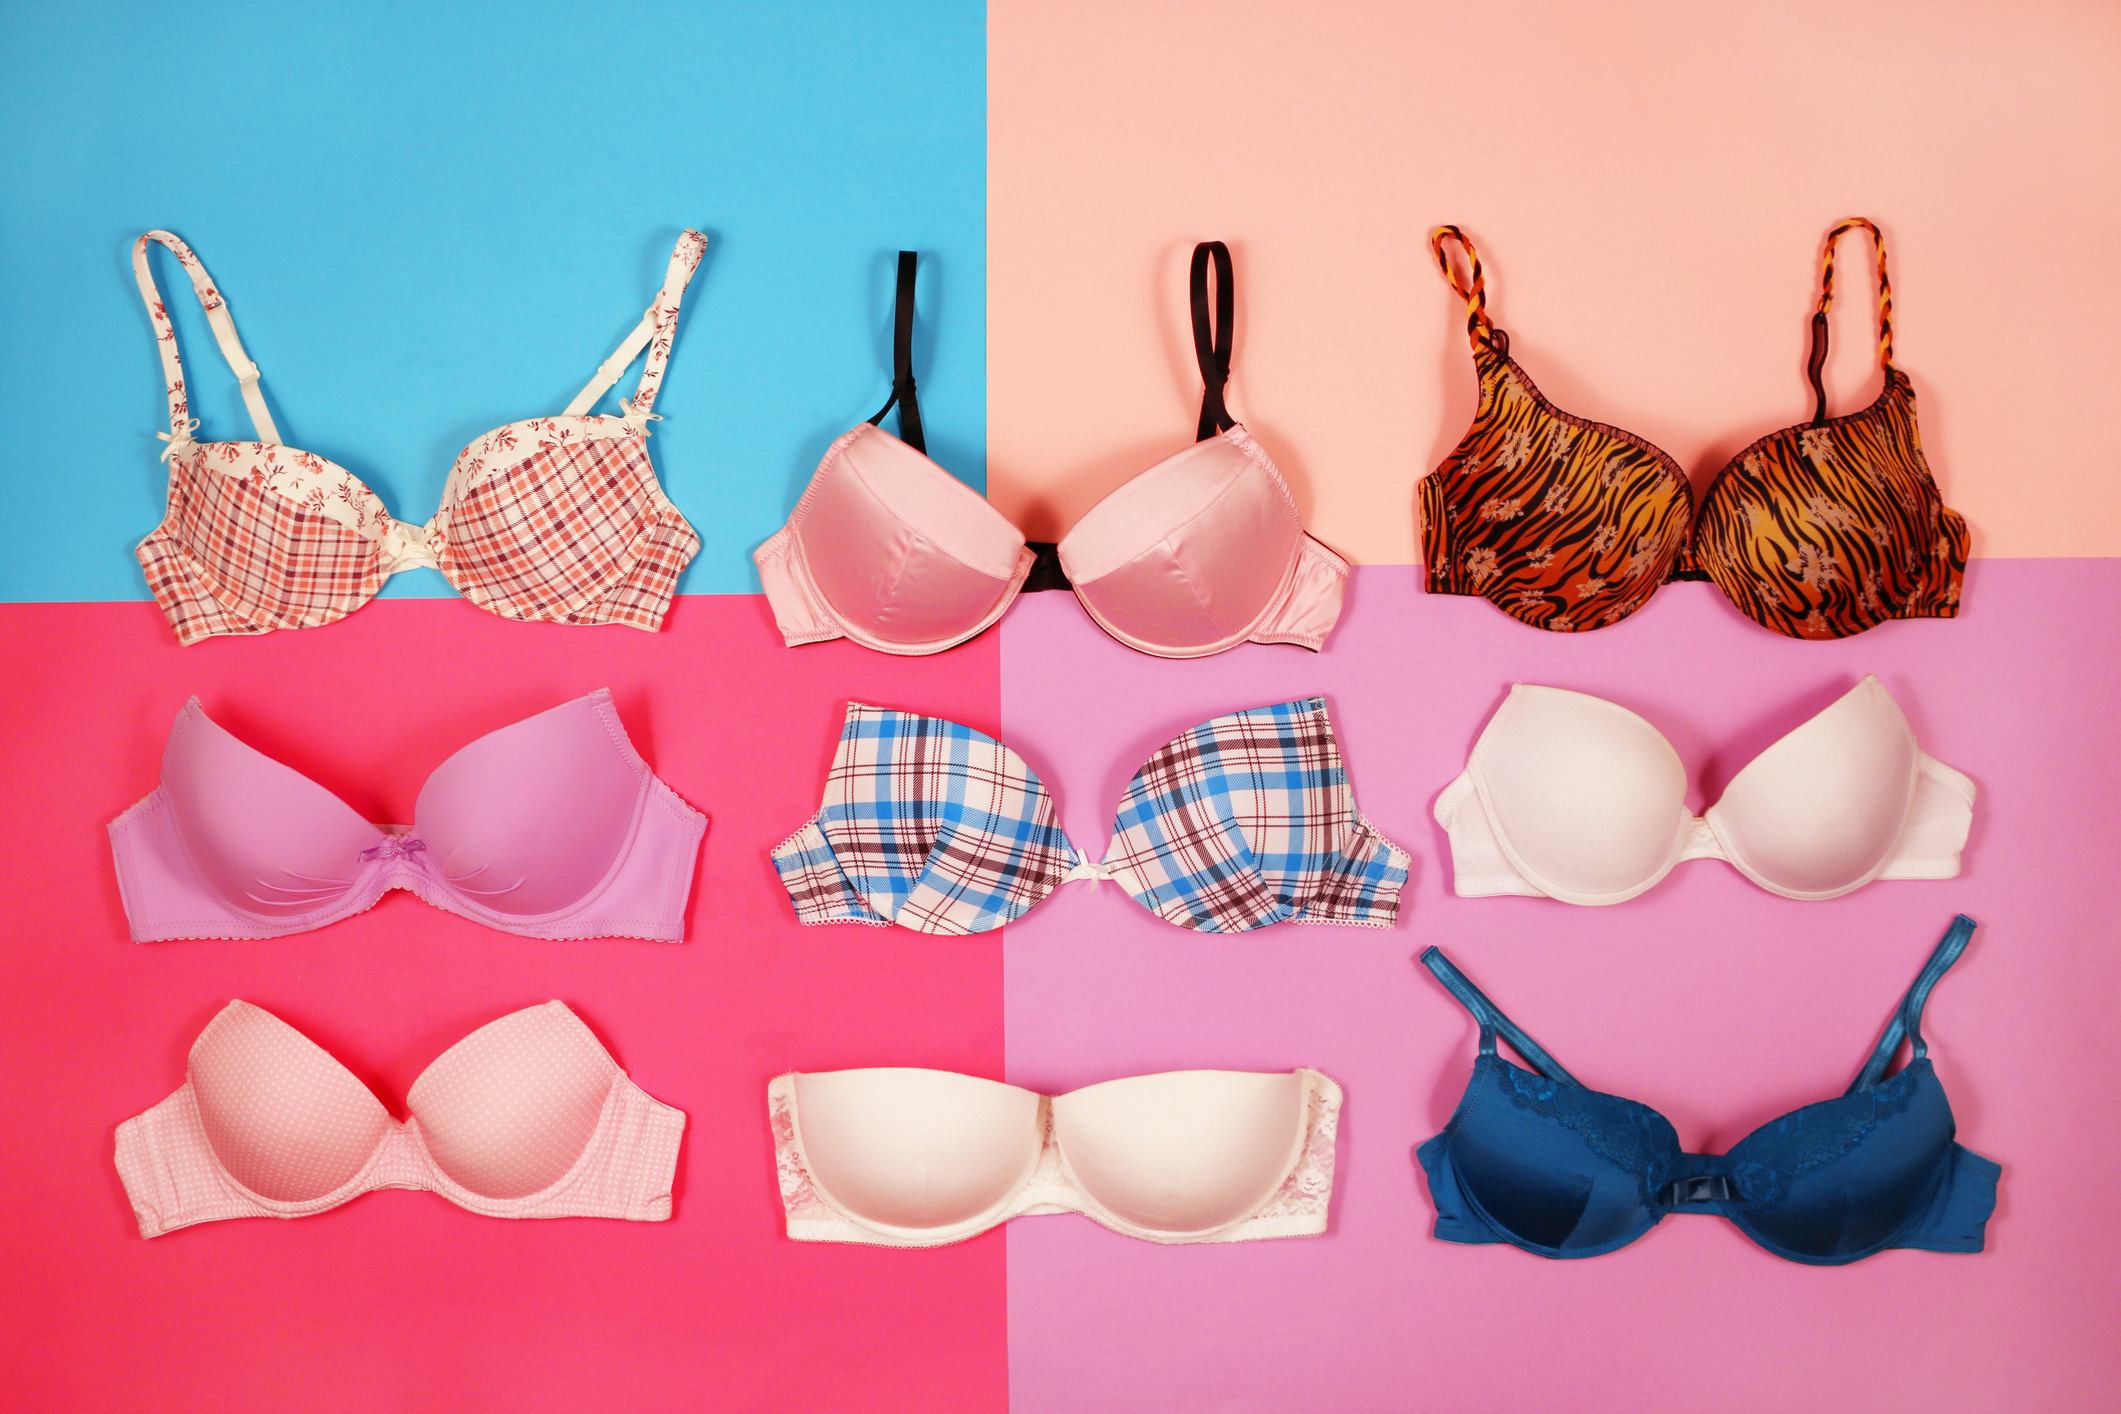 Custom bra shopping: Important questions to ask before investing